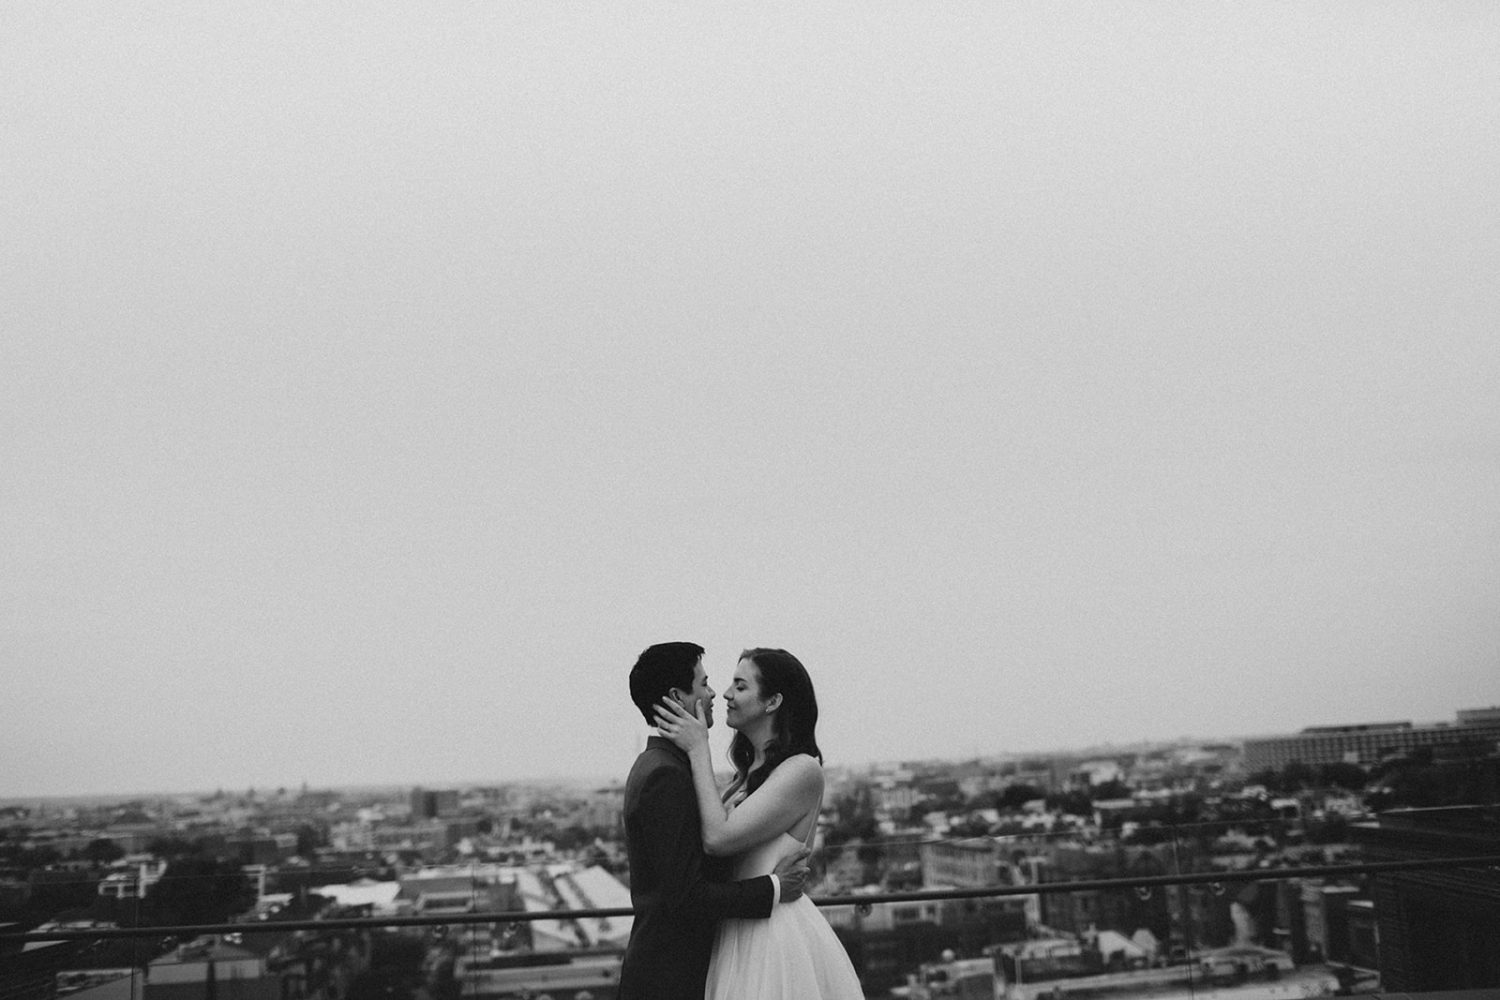 Couple embrace at the line dc hotel rooftop